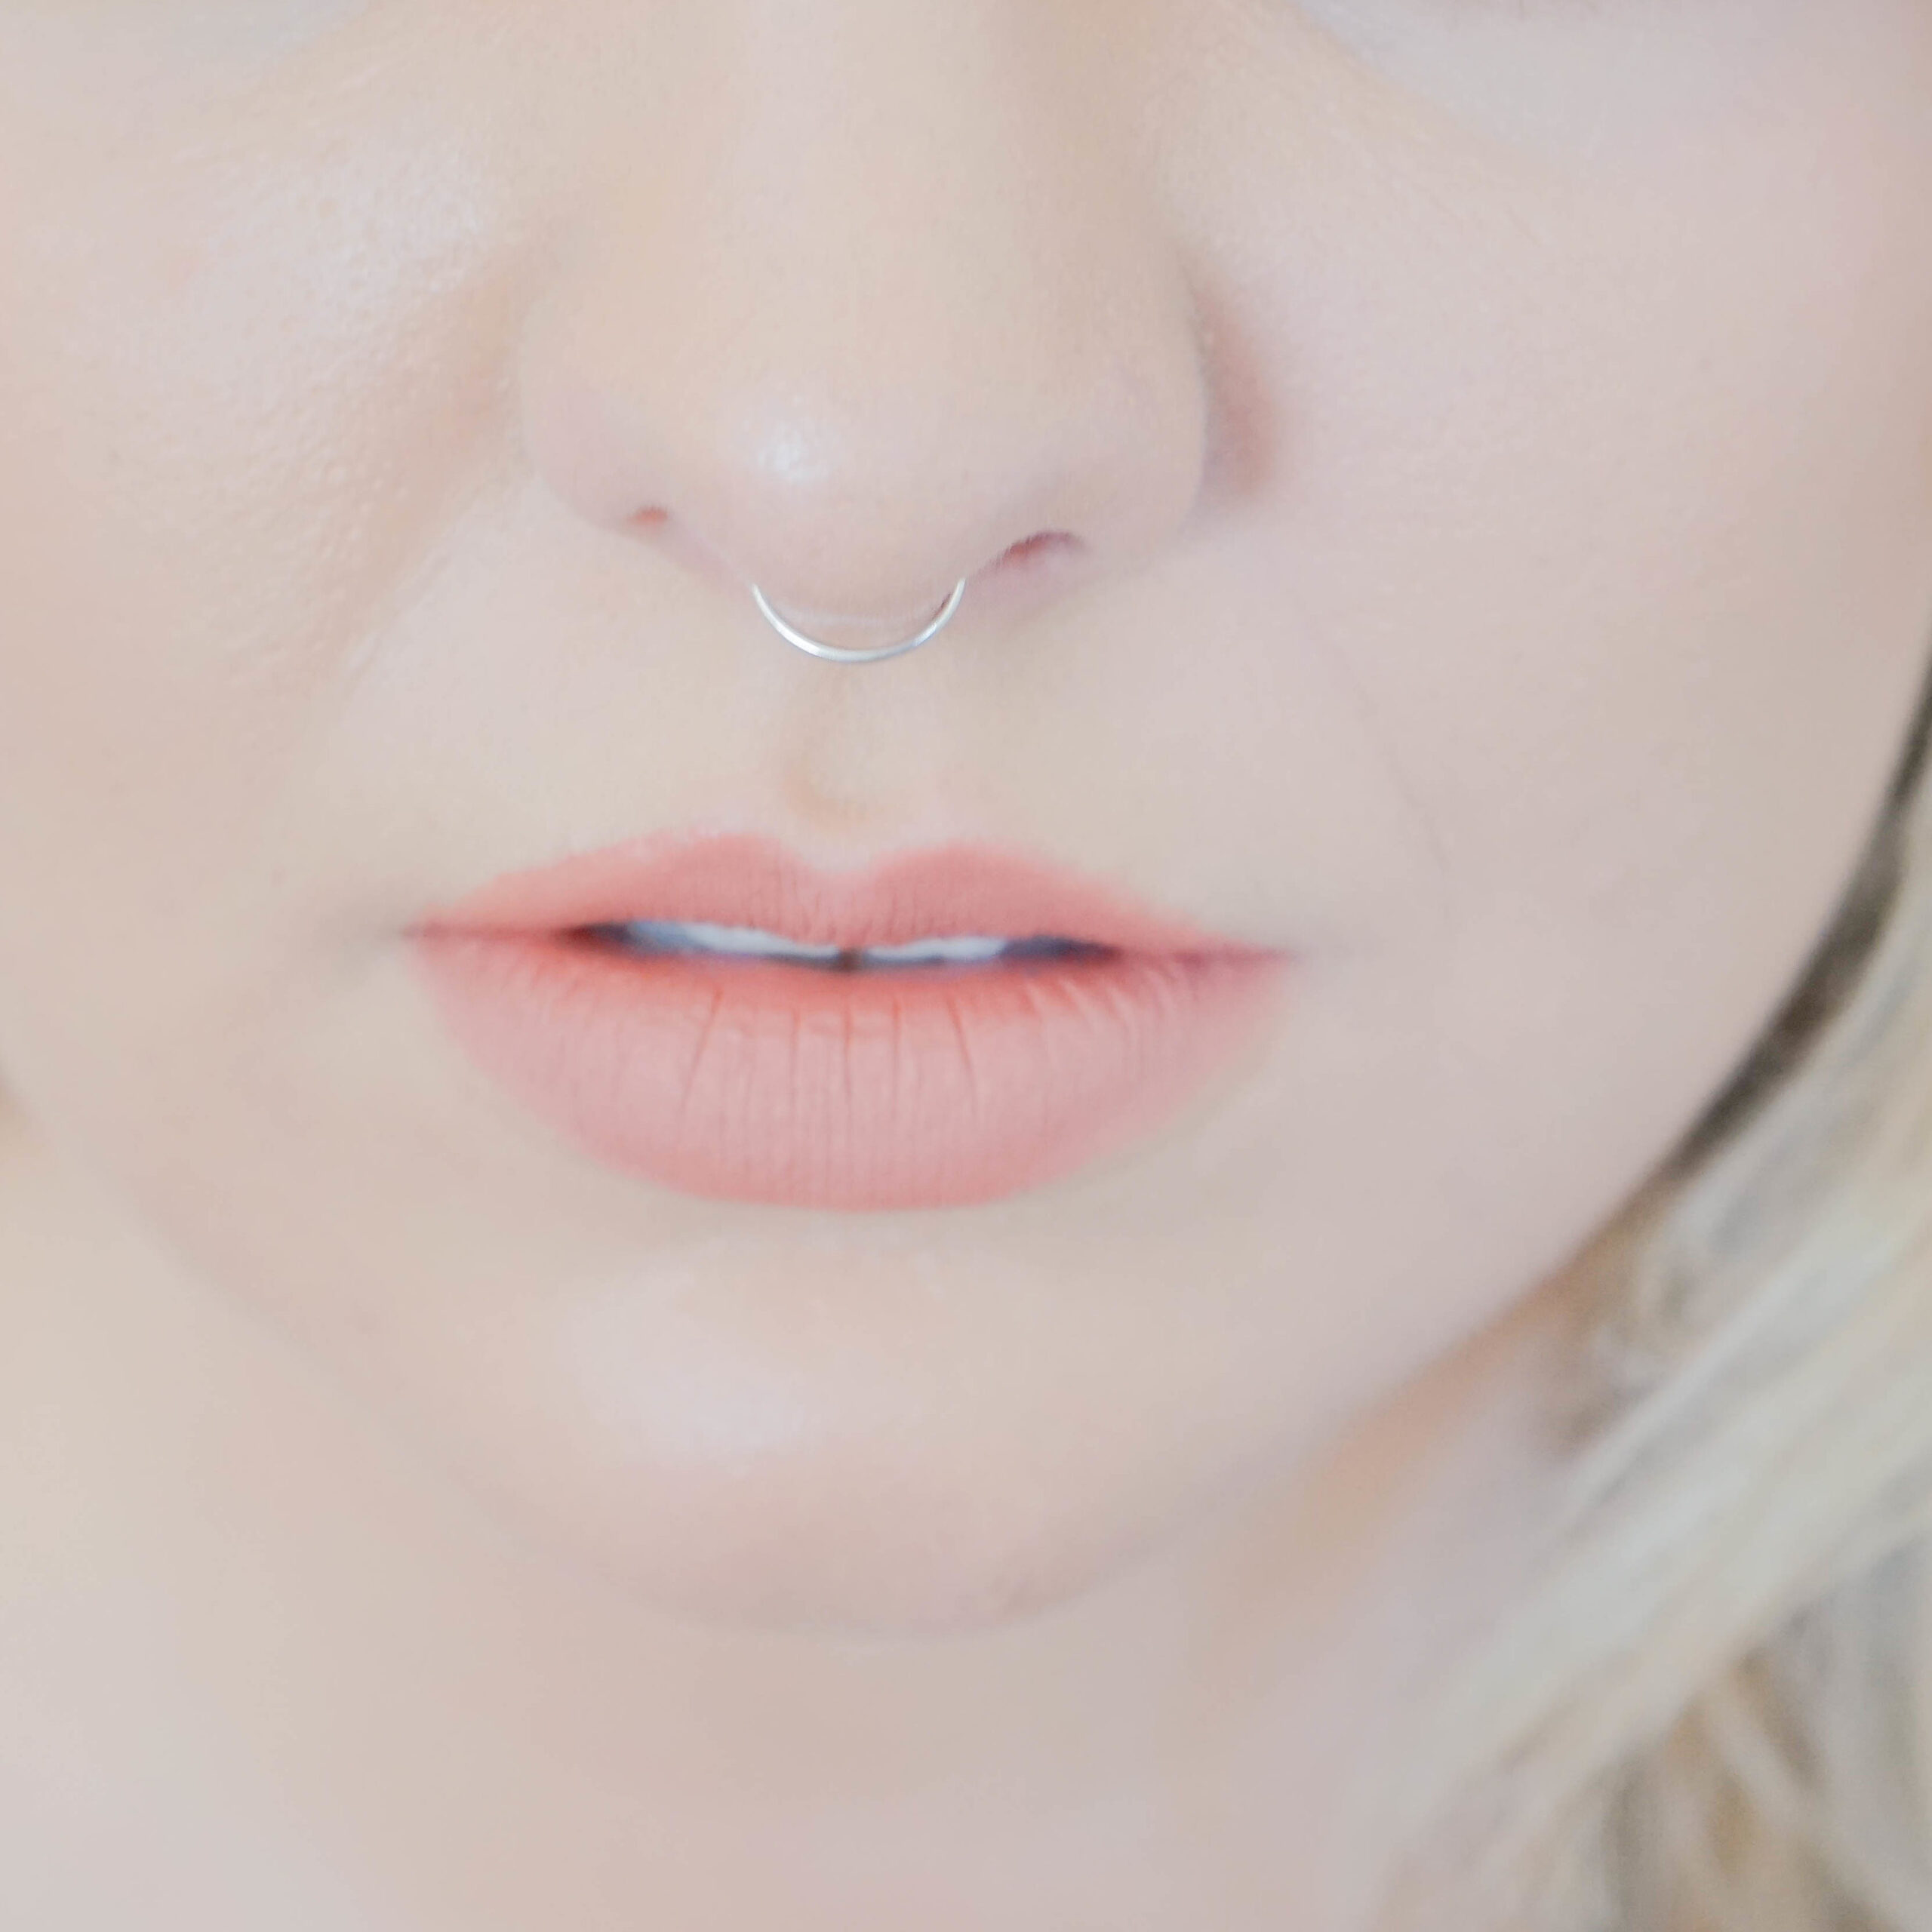 14K Yellow Gold Septum Ring with Clicker 16g Nose Hoop Piercing Jewelry for  Her | eBay